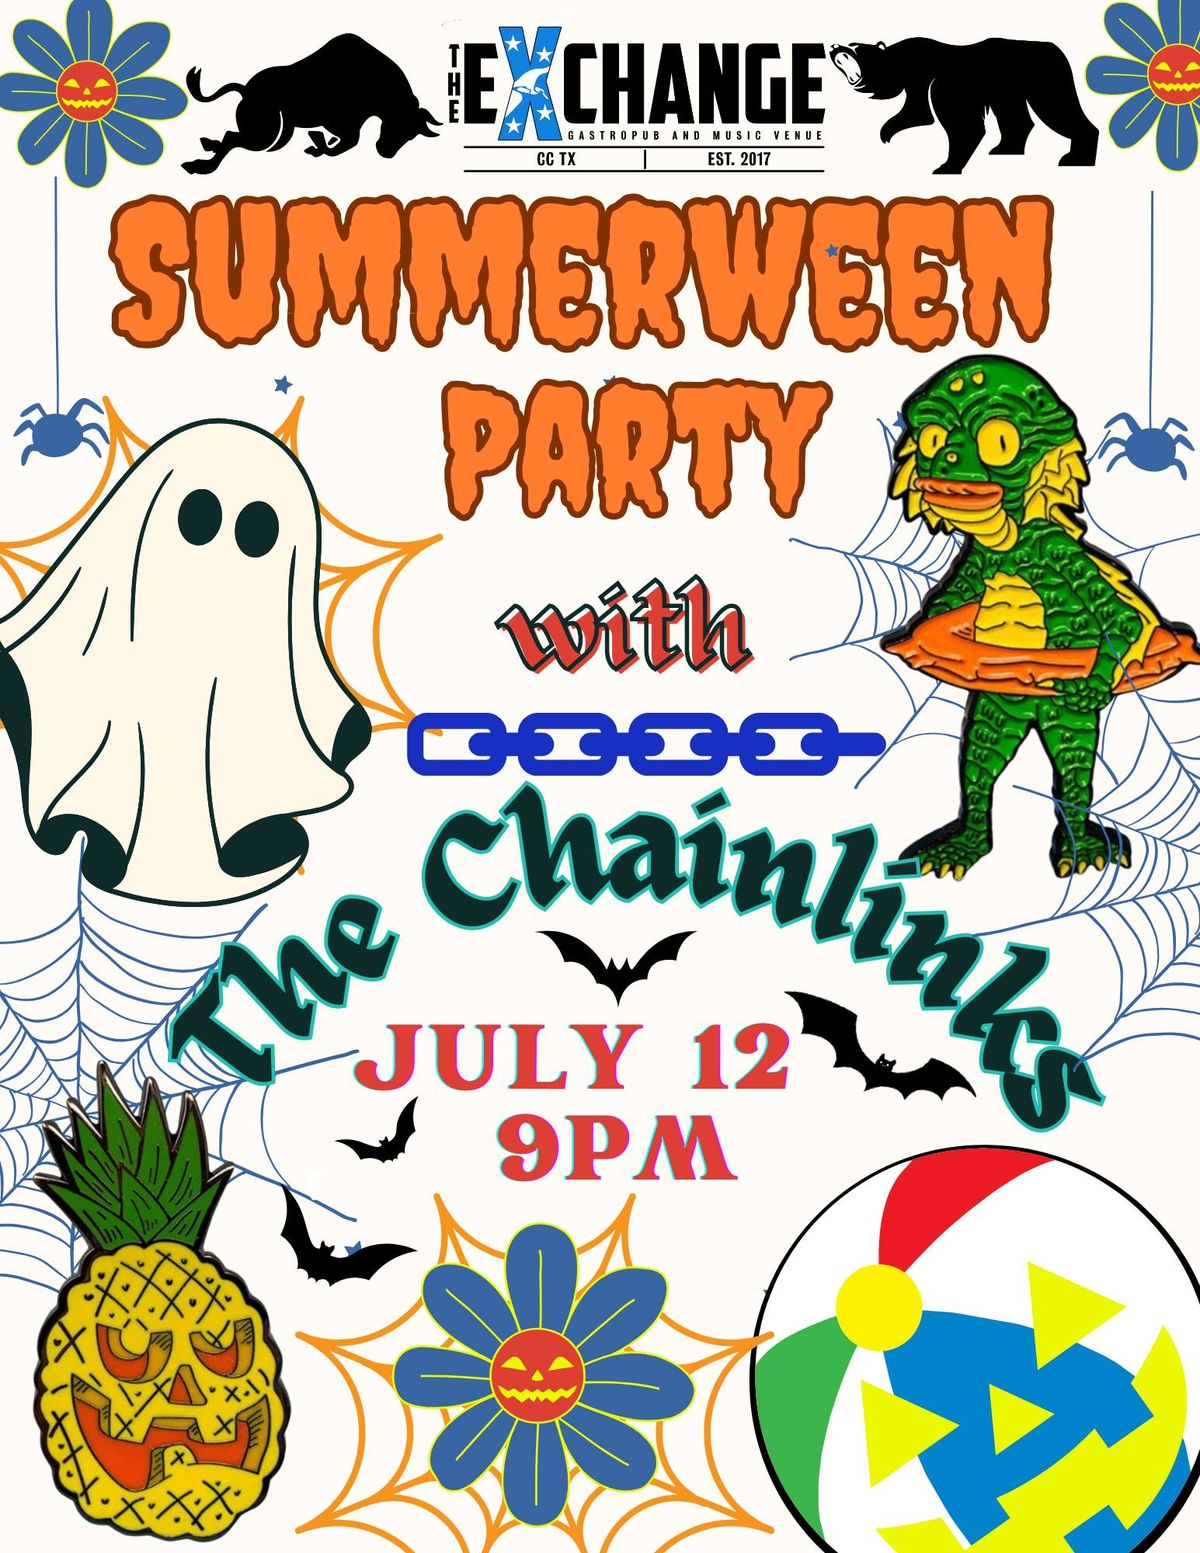 Summerween party with The Chainlinks 